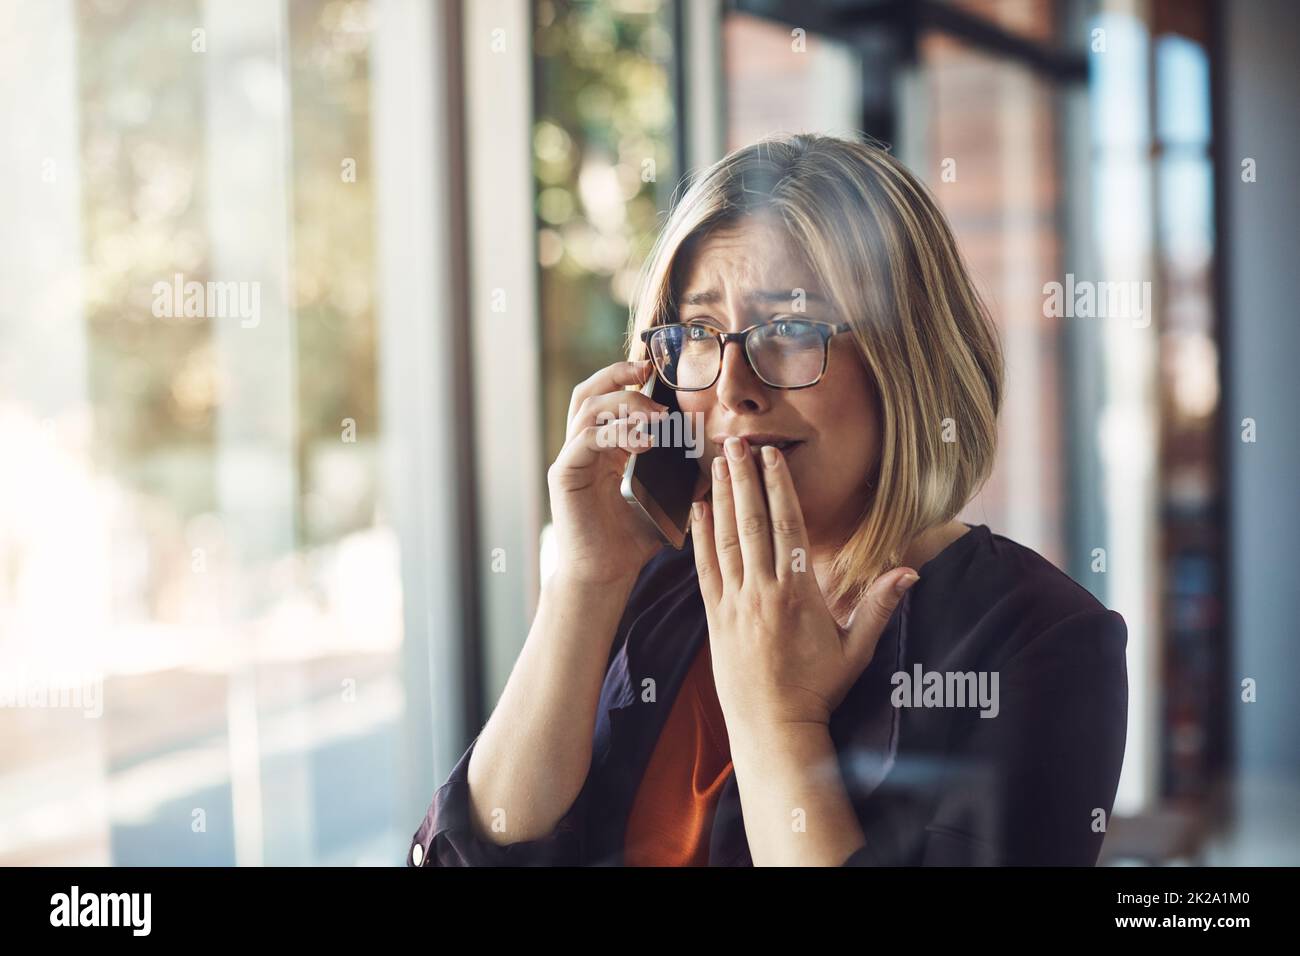 In that moment, life changed forever. Shot of a young woman looking distraught while talking on a mobile phone in a modern office. Stock Photo